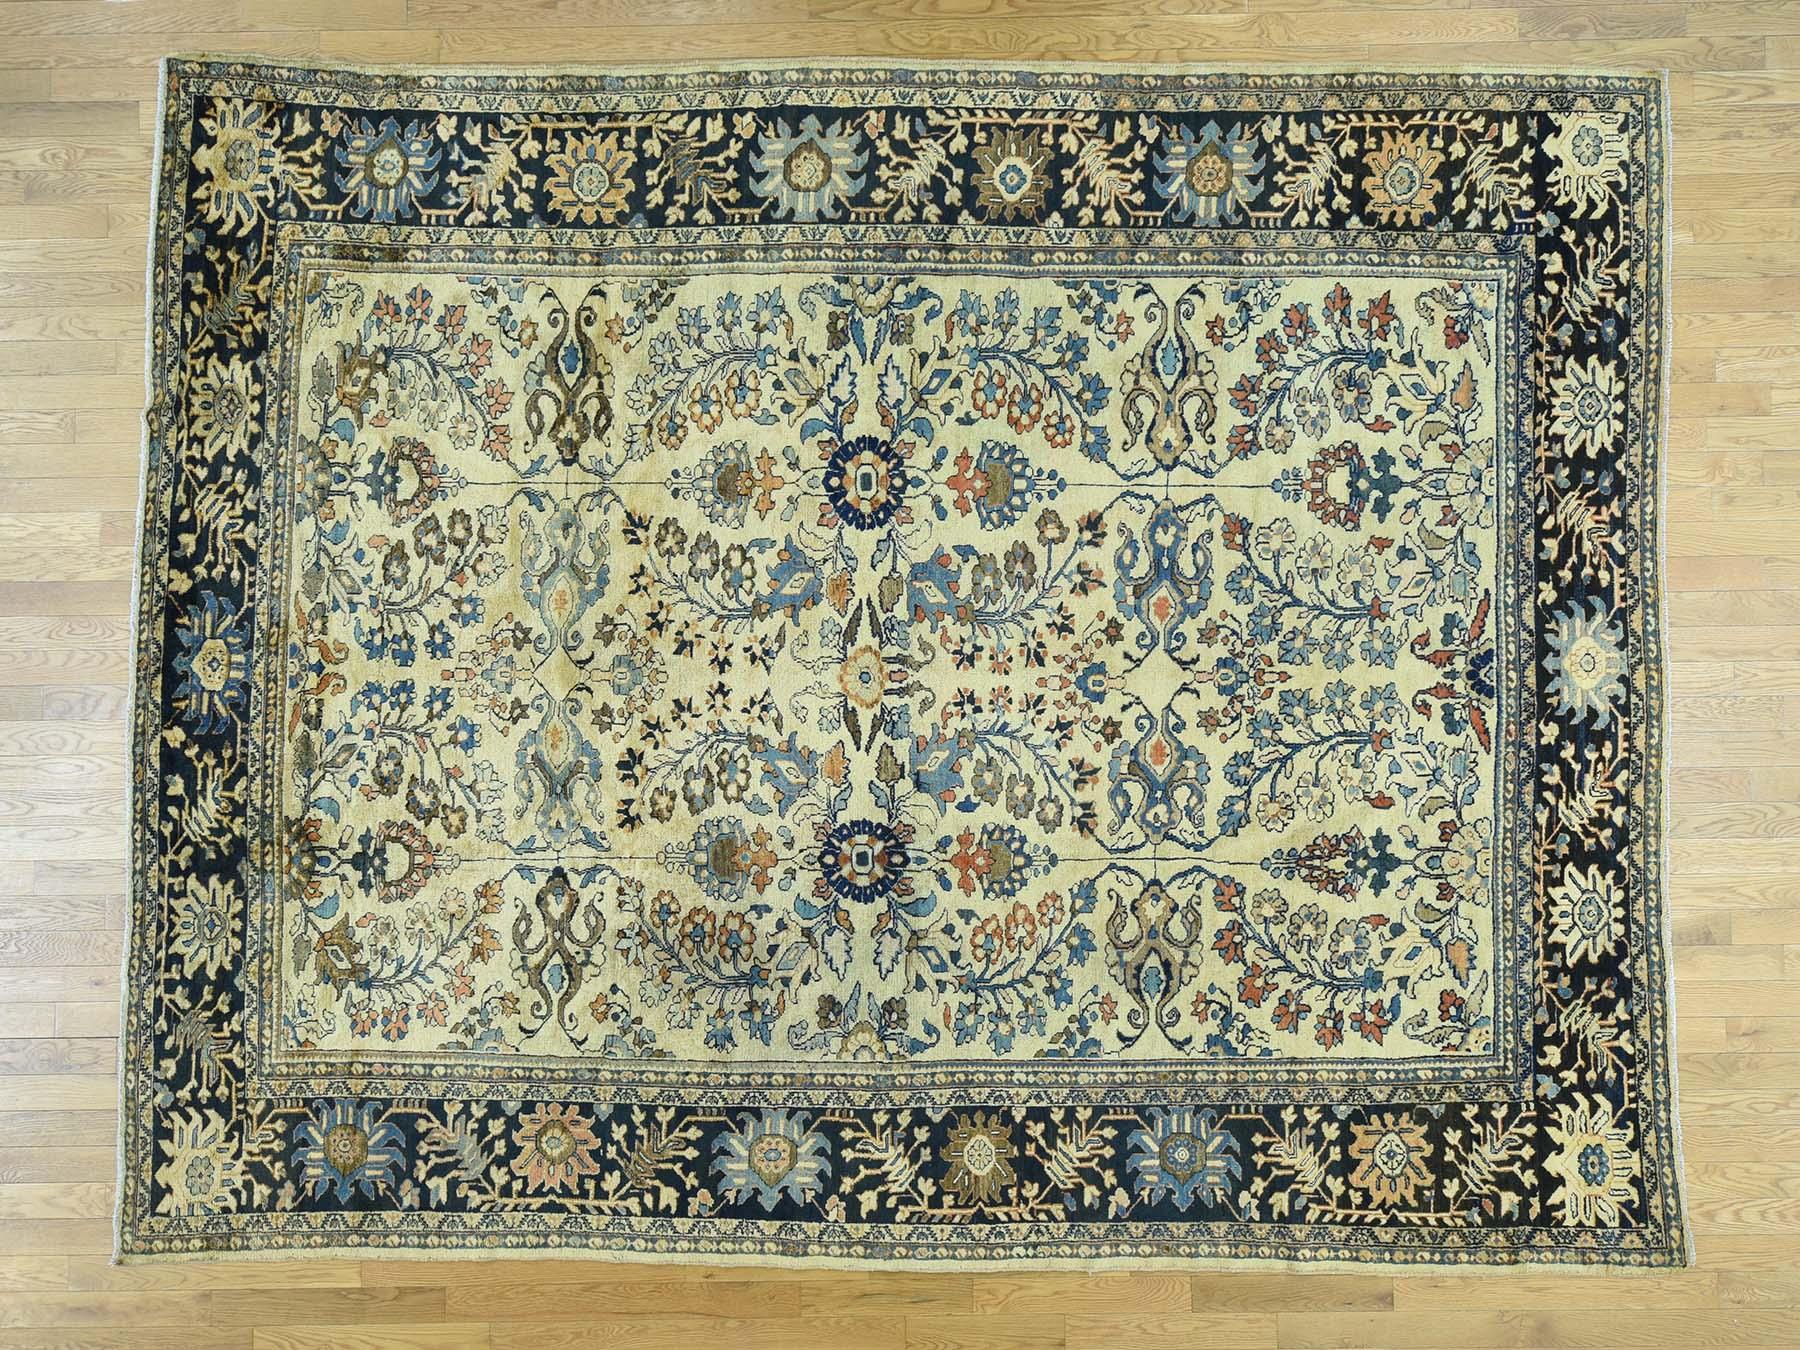 Early 20th Century Ivory 1920 Handmade Persian Lilahan Rug, Floral Design For Sale